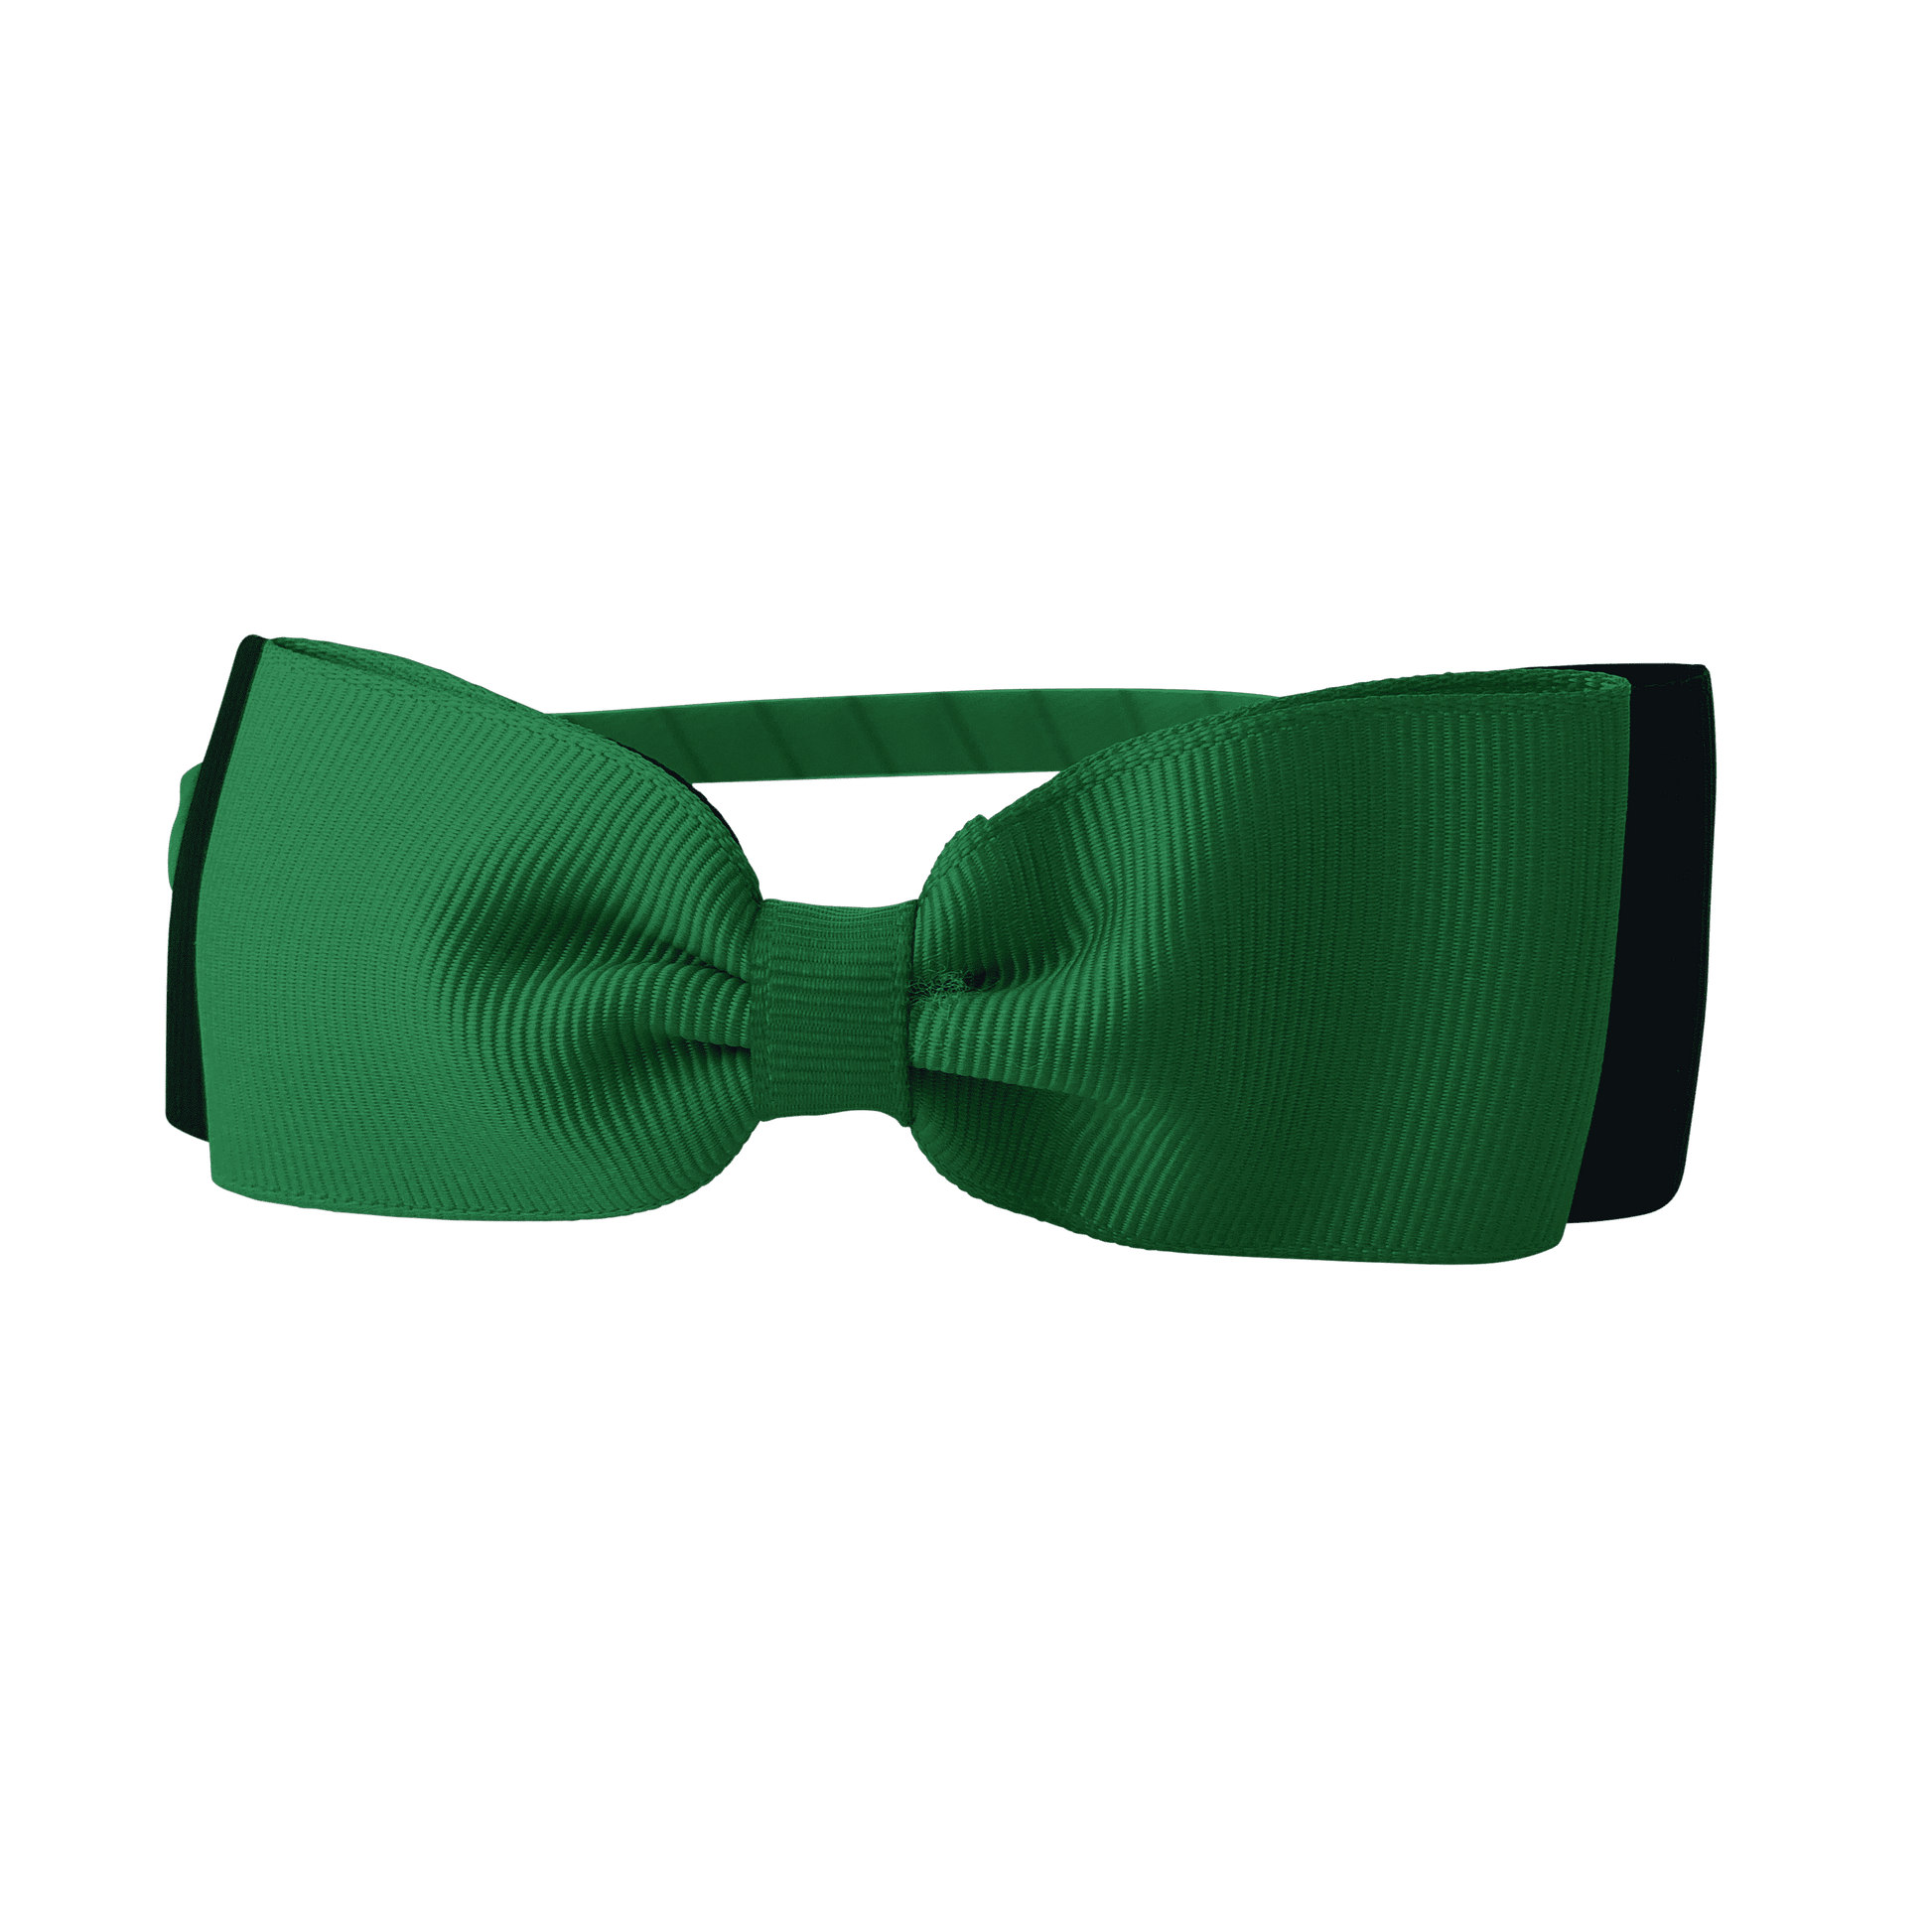 Headband with Bowtie - Combined Colours - Ponytails and Fairytales